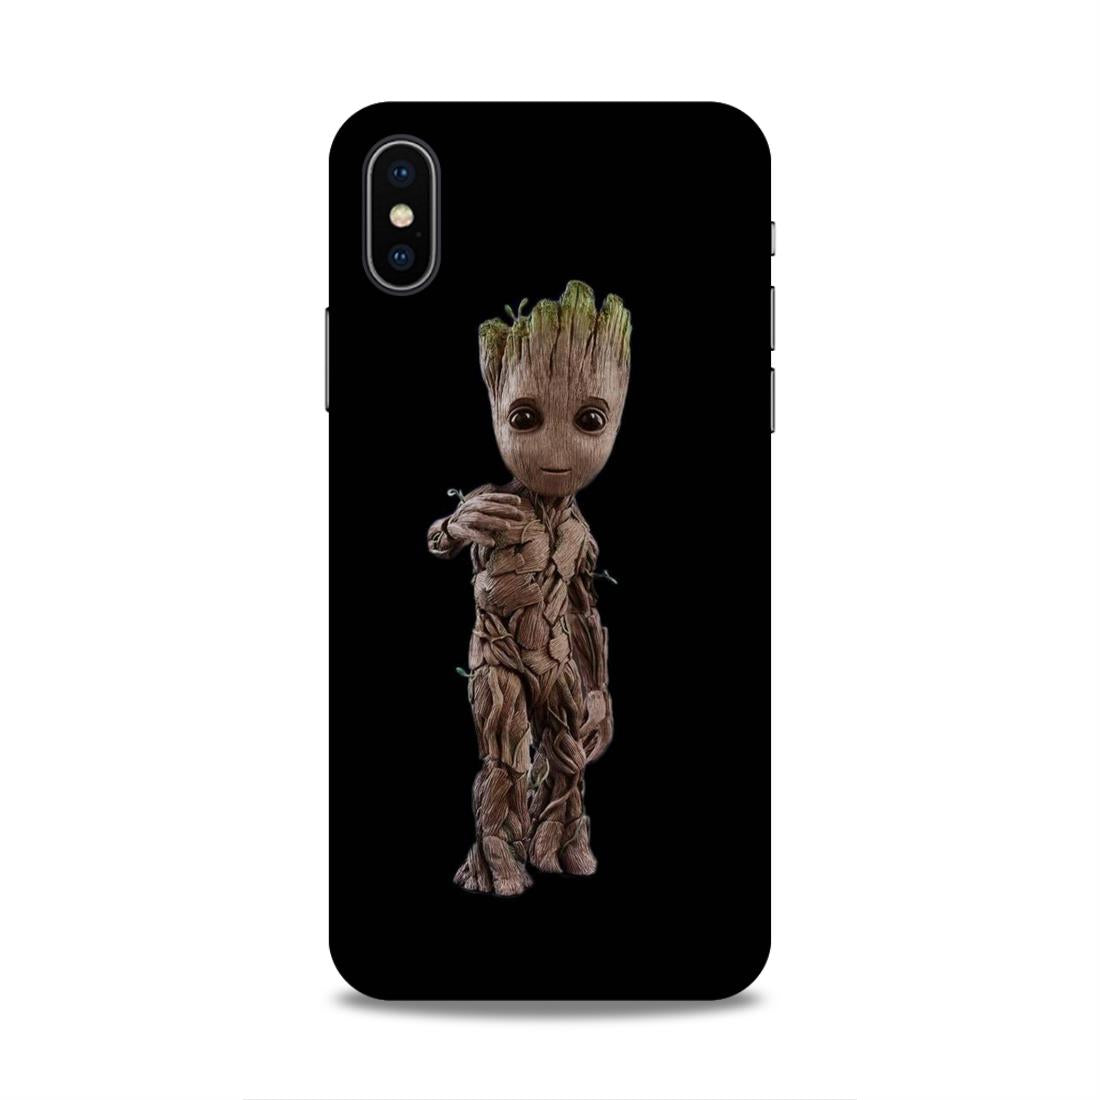 Grood Hard Back Case For Apple iPhone X/XS